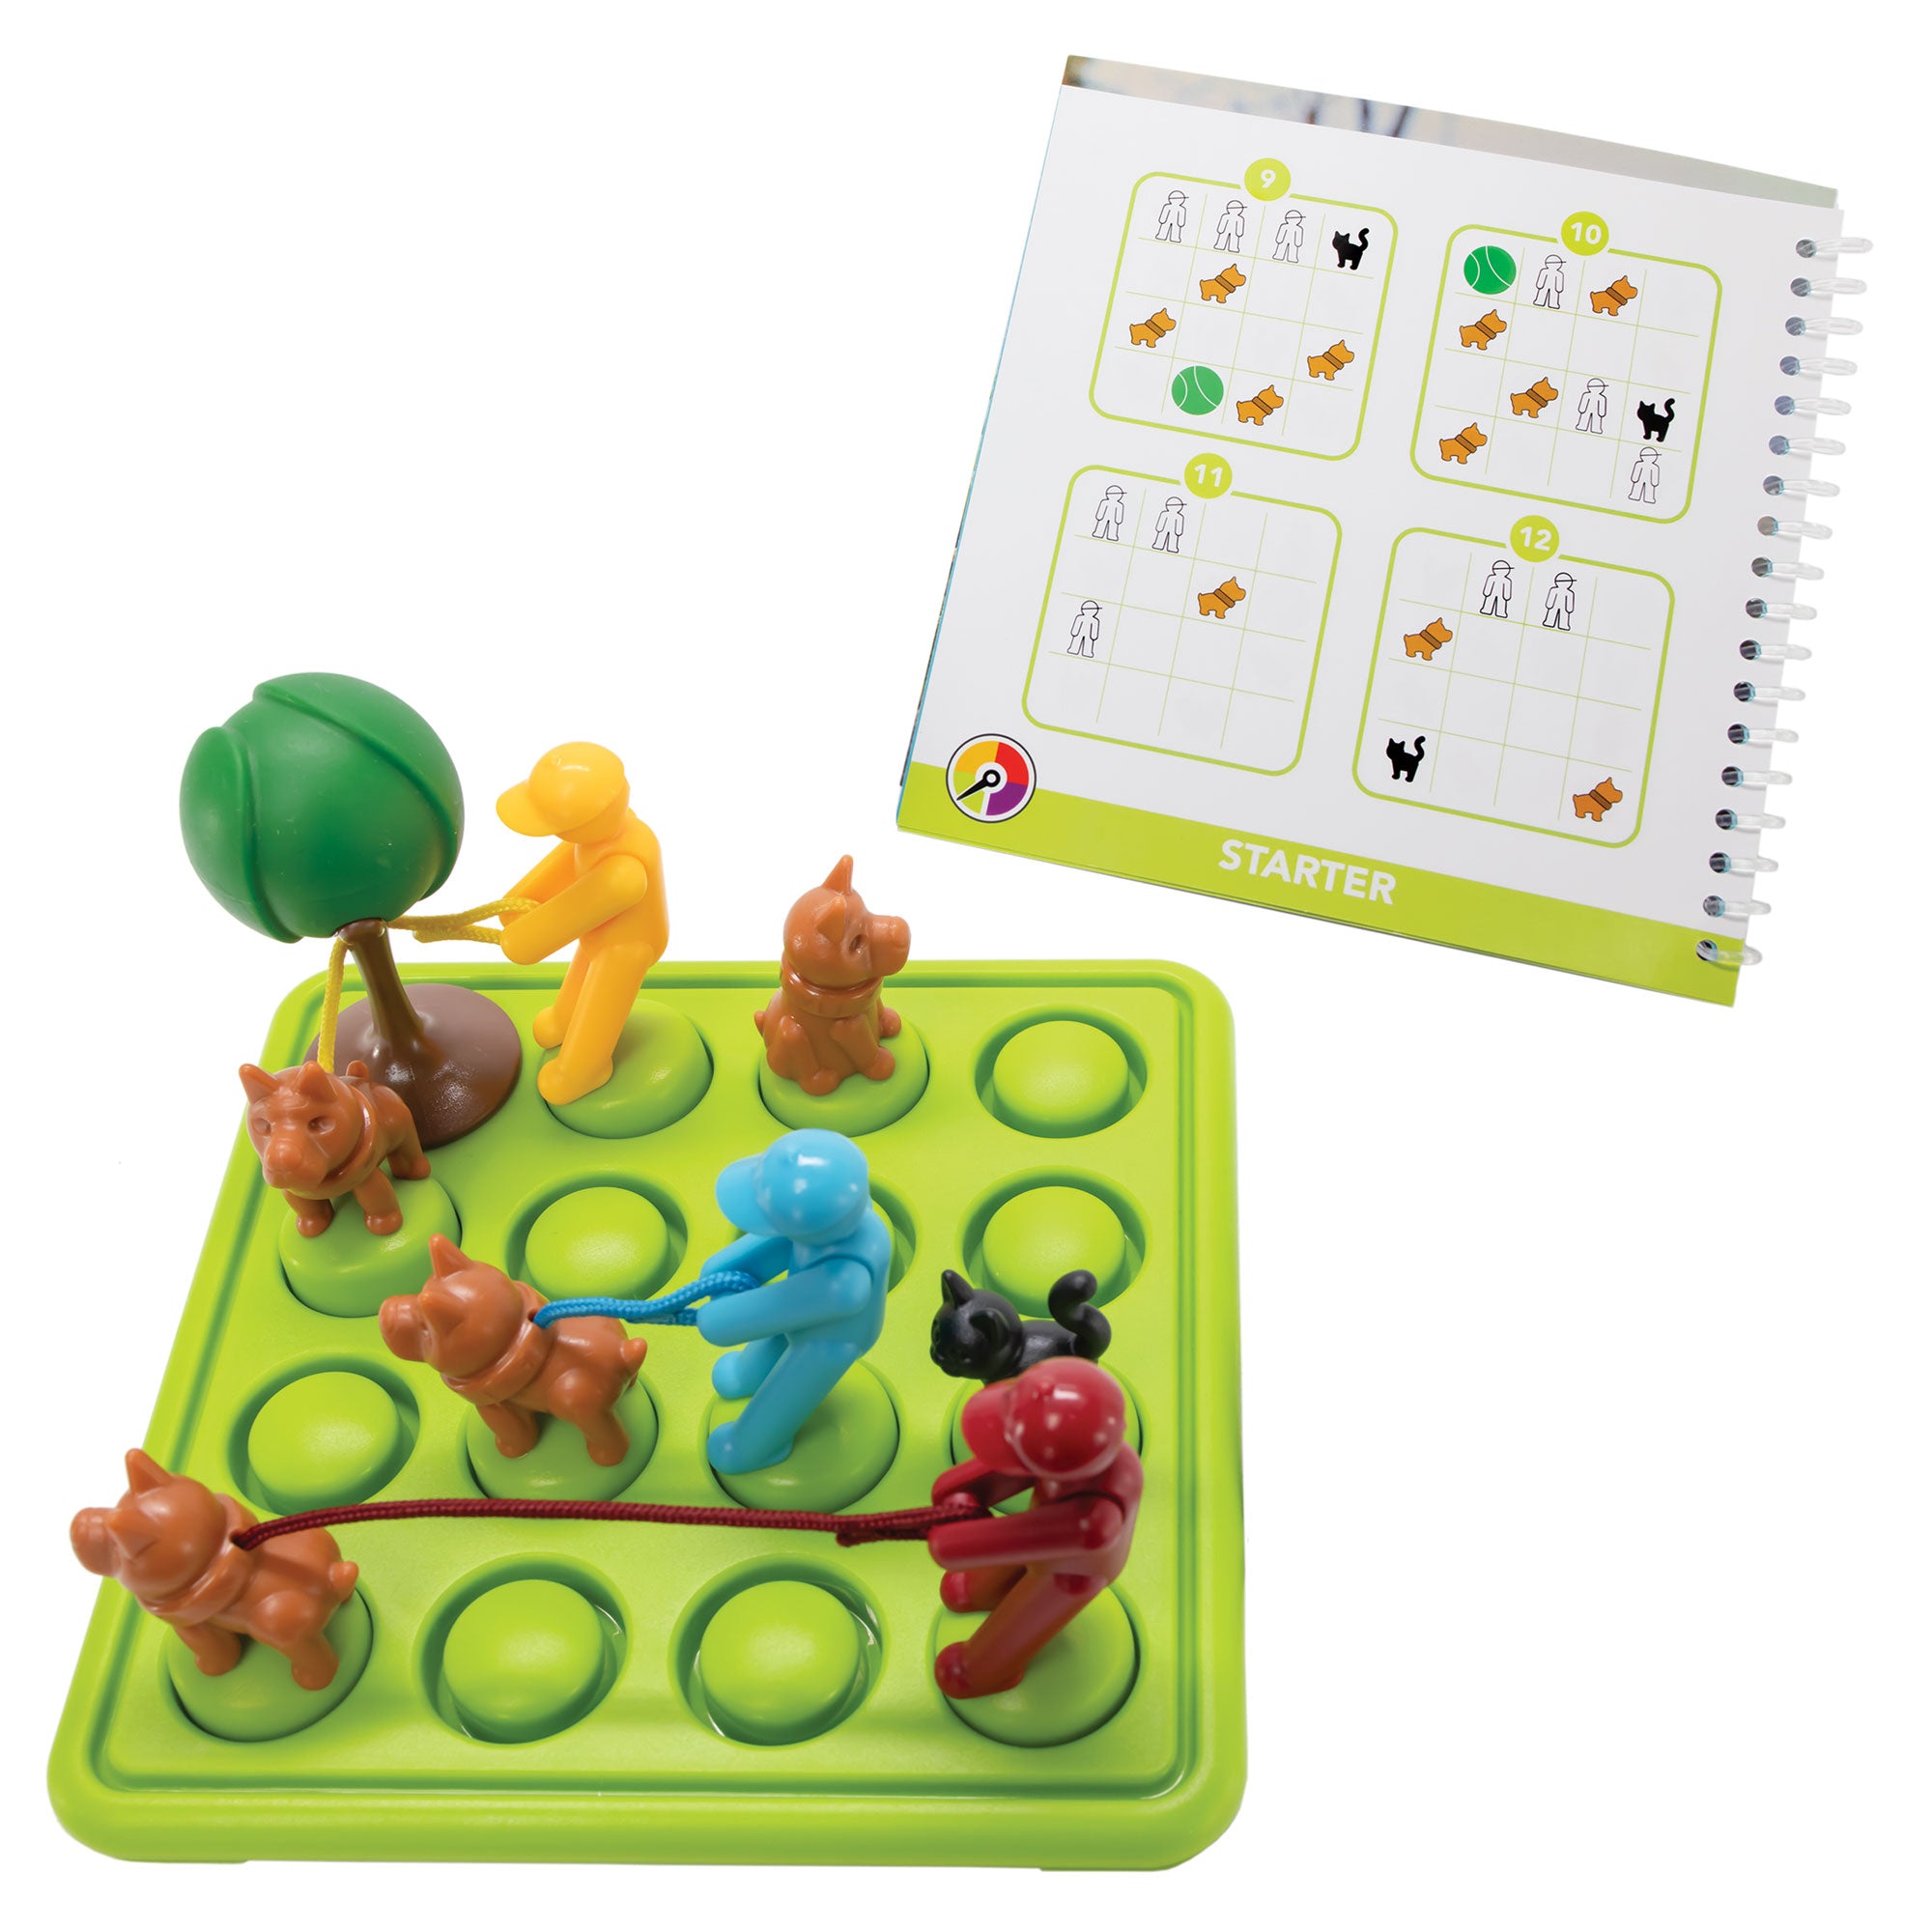 Walk the Dog Smart Game. The square game board is bright green with a grid of 4 by 4 circles that allow pieces to be placed on top. The pieces on top are colorful men with leashes attached to a dog, a cat, and a tree piece. In the upper-right is a spiral bound game book with a starter challenge.